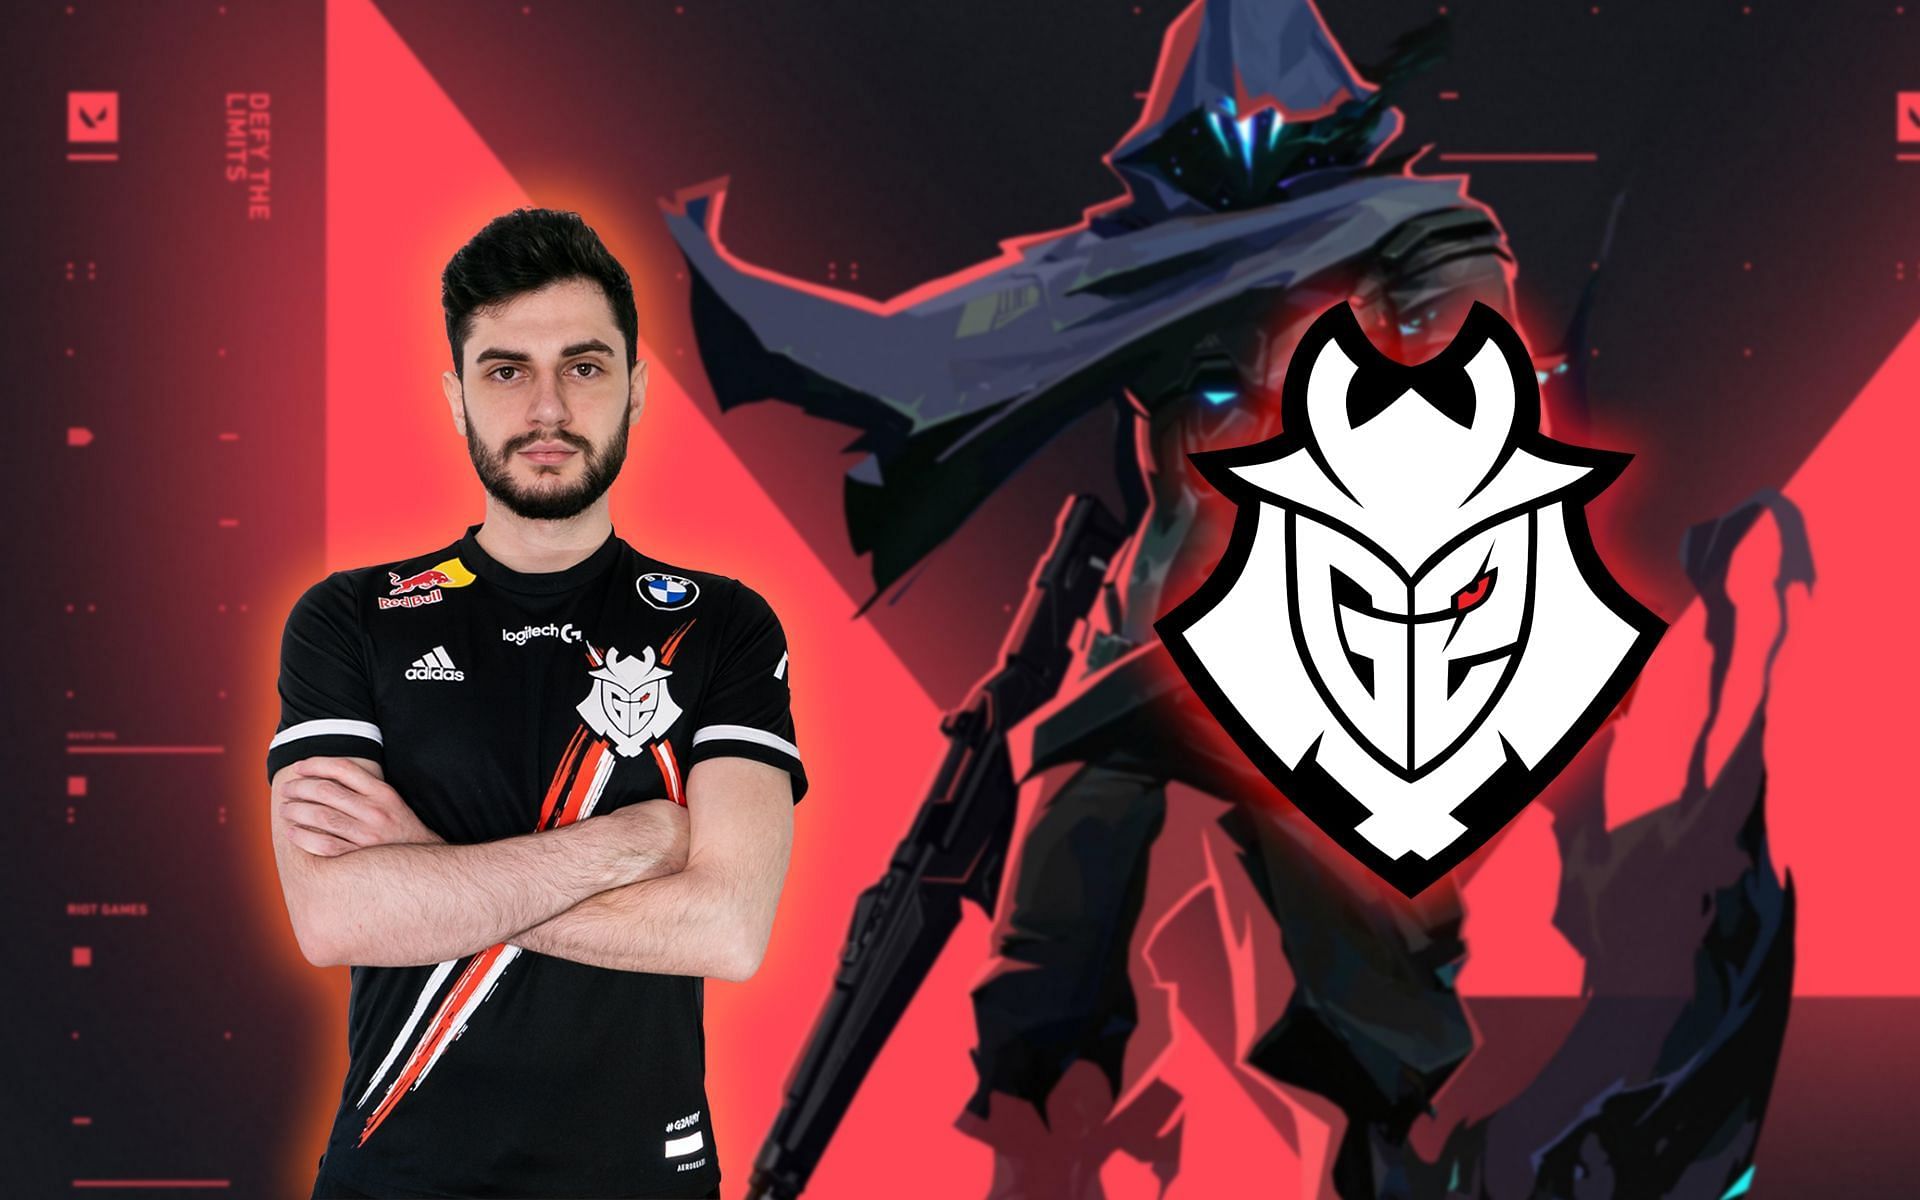 Oscar &quot;Mixwell&quot; Canellas Clocho gets benched after G2&#039;s qualification for EMEA Challenger 1 (Image by Sportskeeda)